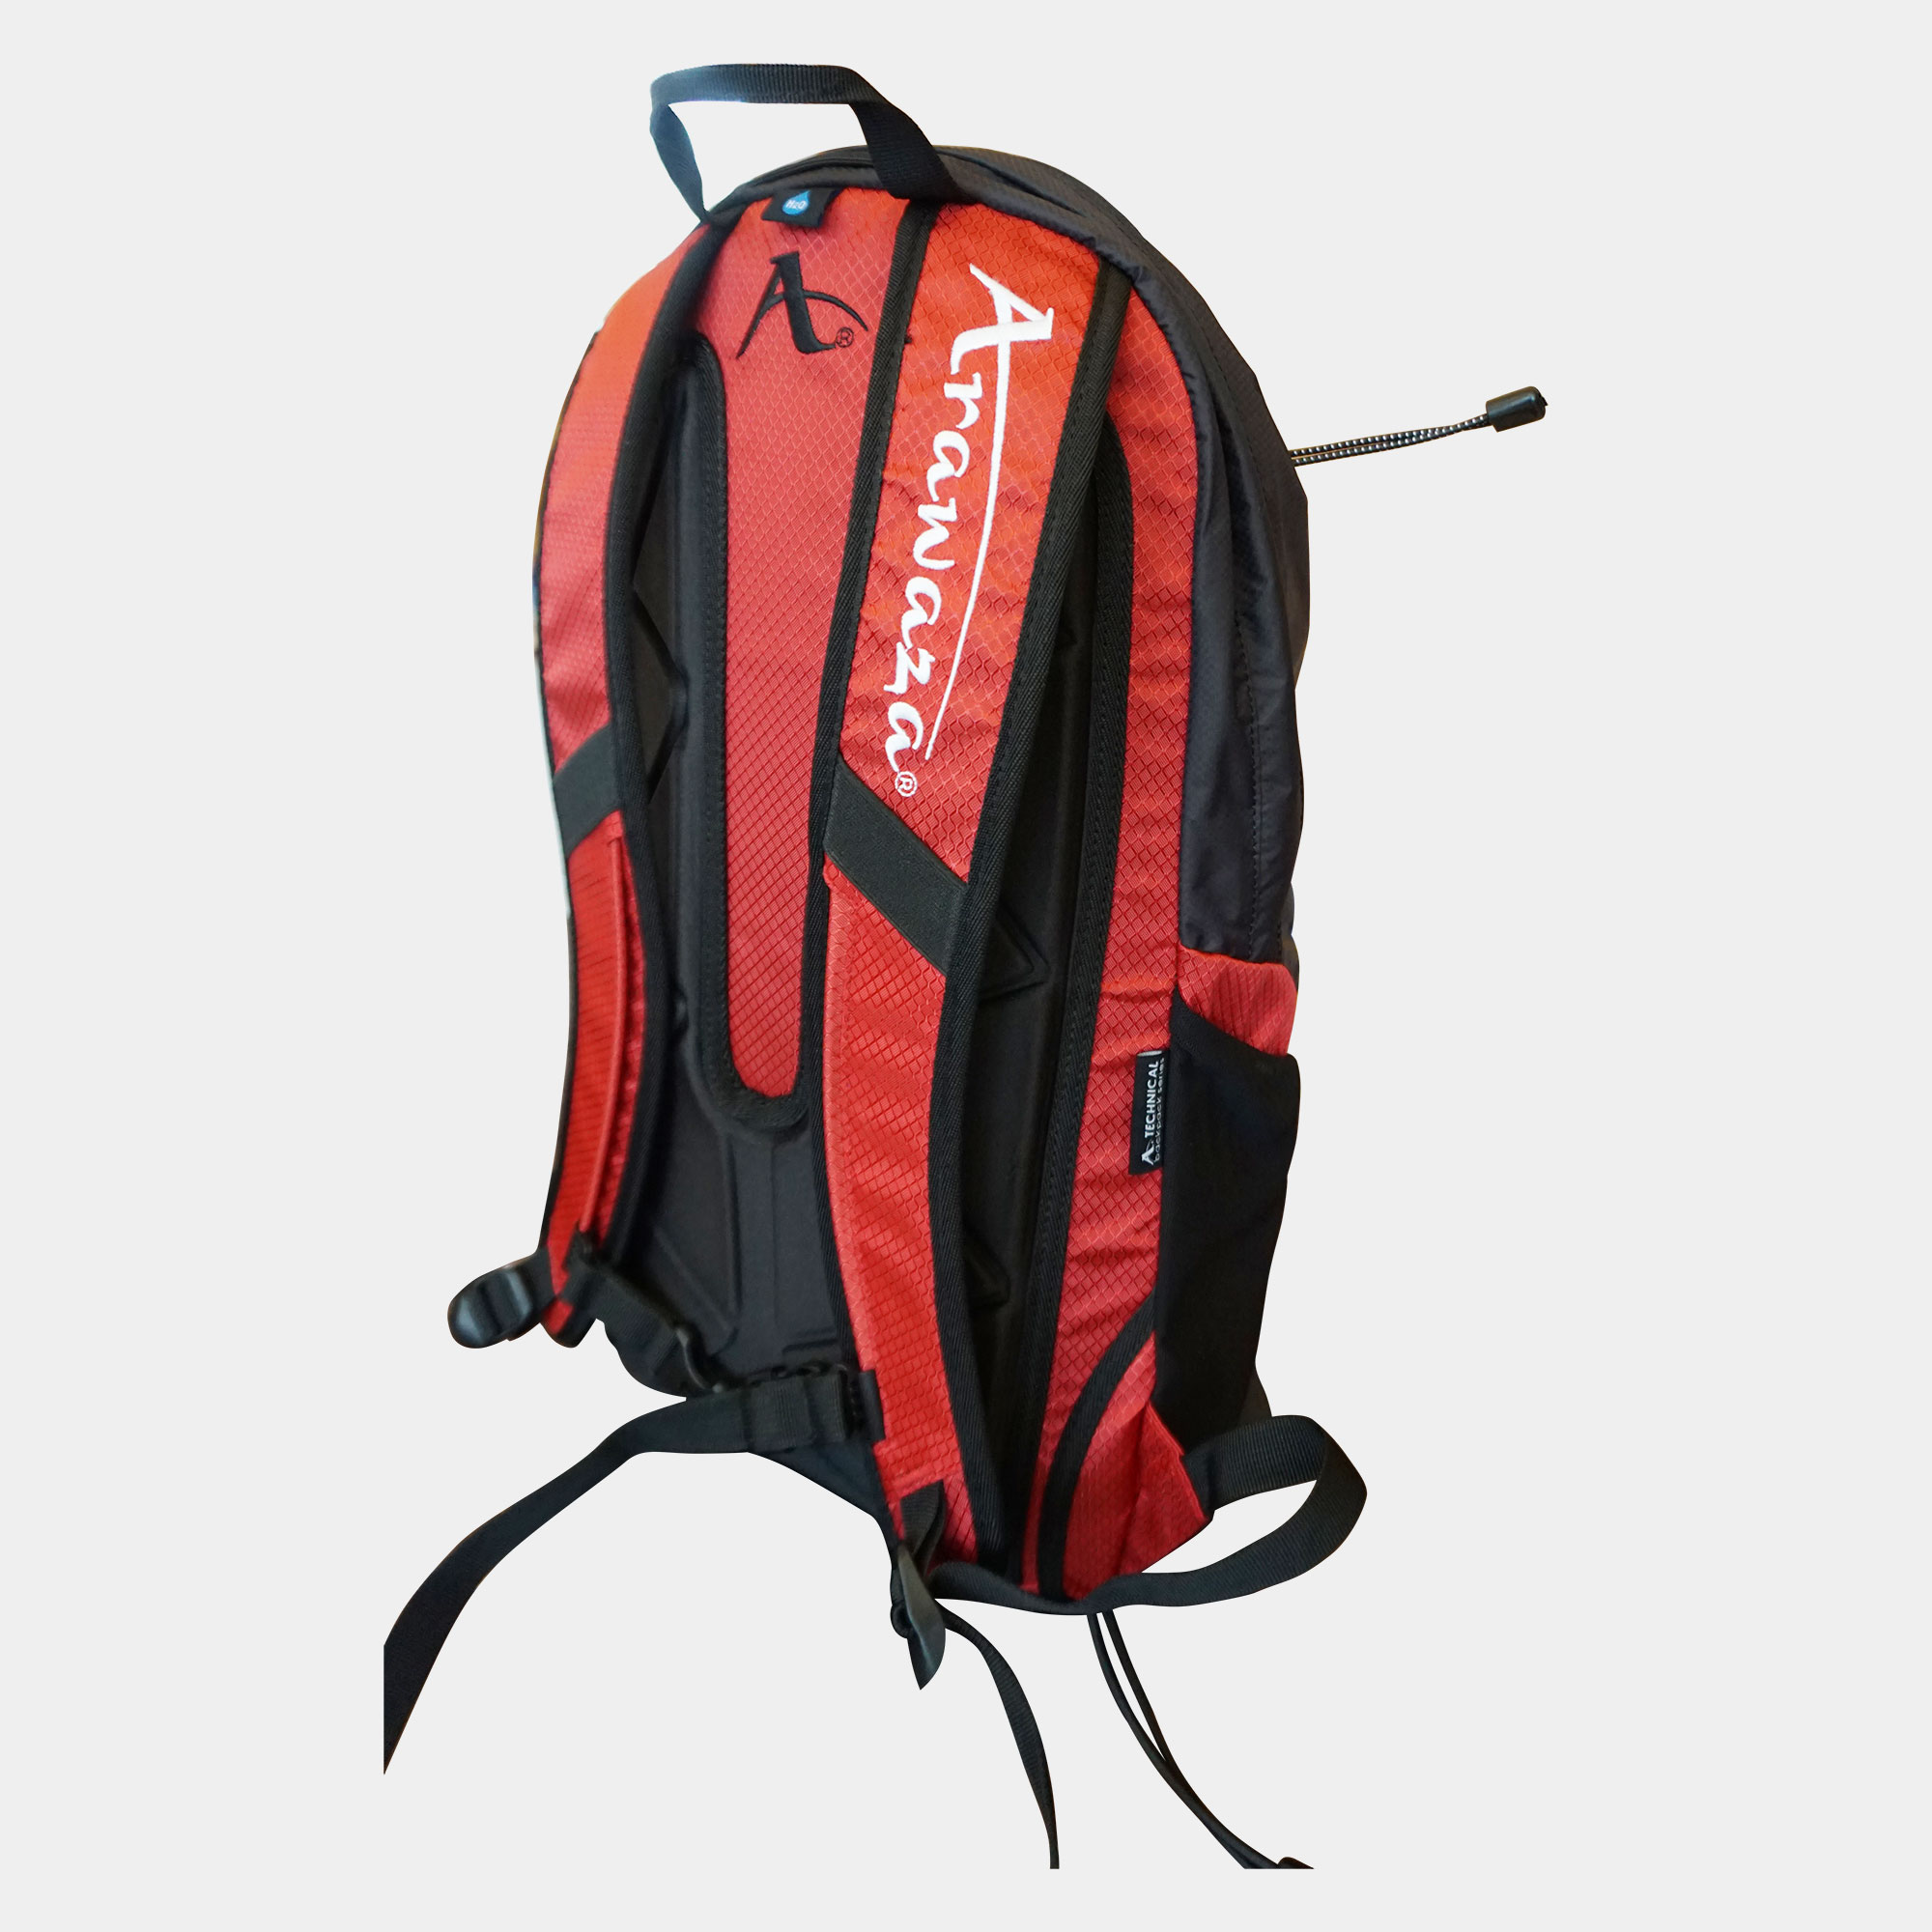 Punok Karate Competition Backpack - your companion!, 89,99 €